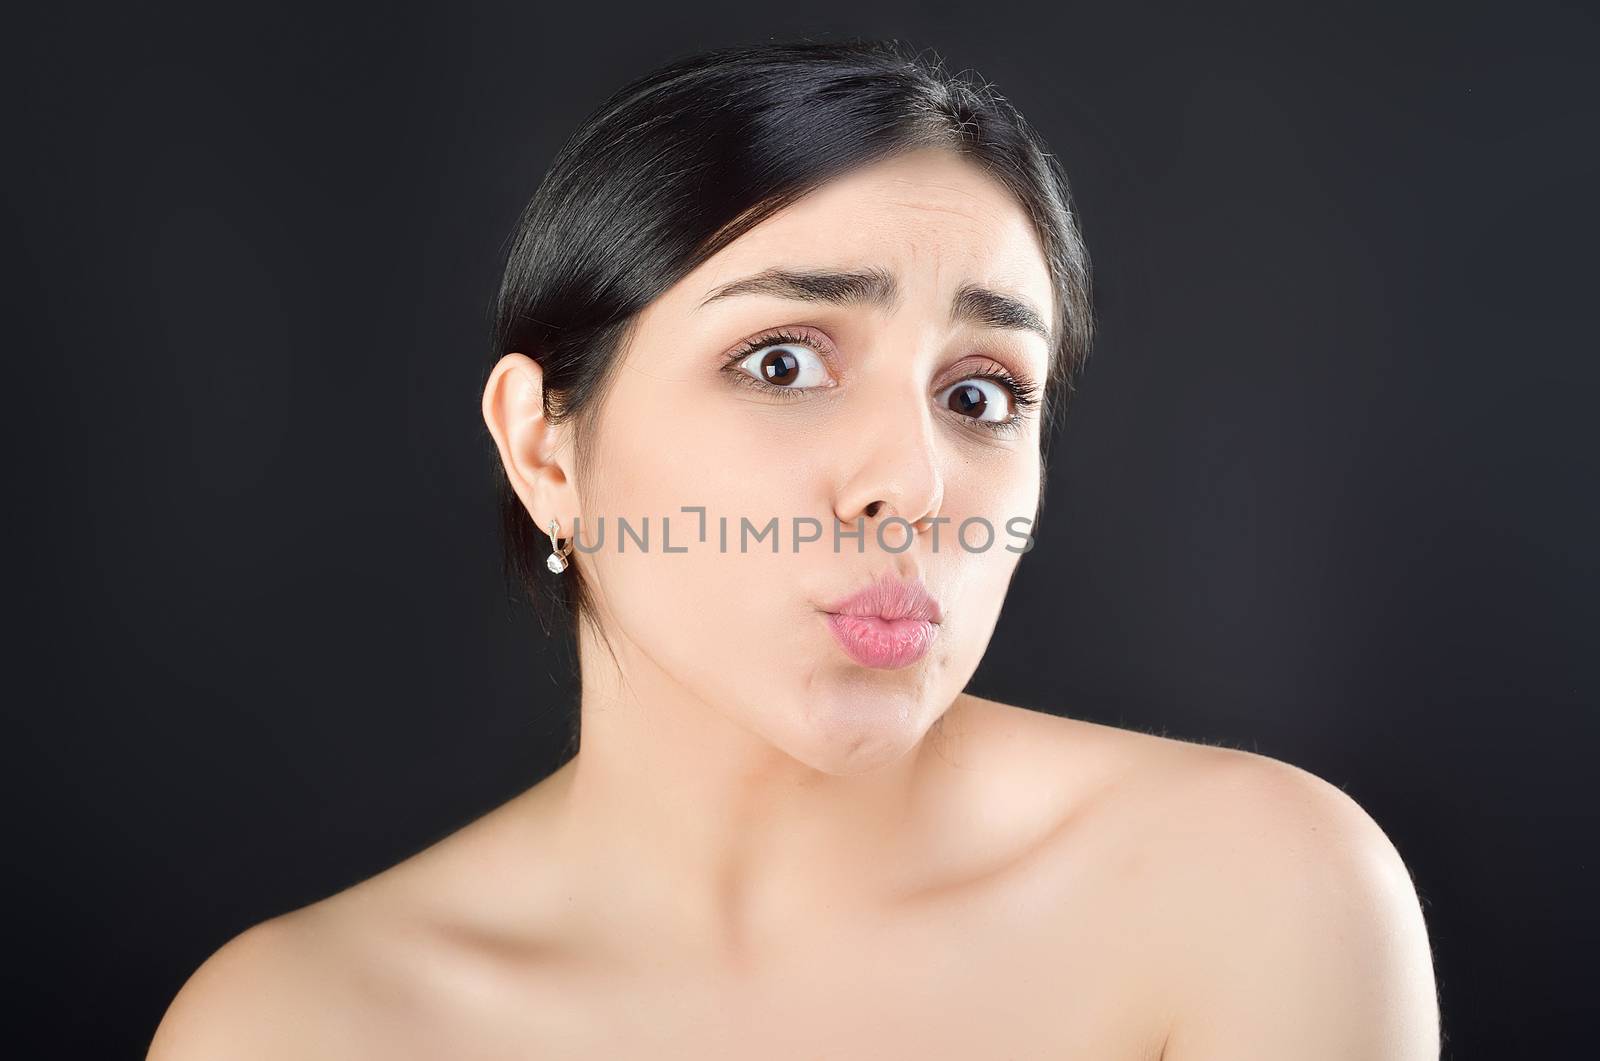 Beauty portrait of a girl with bare shoulders who shows off her lips sending a kiss to the camera. Studio shot on black background